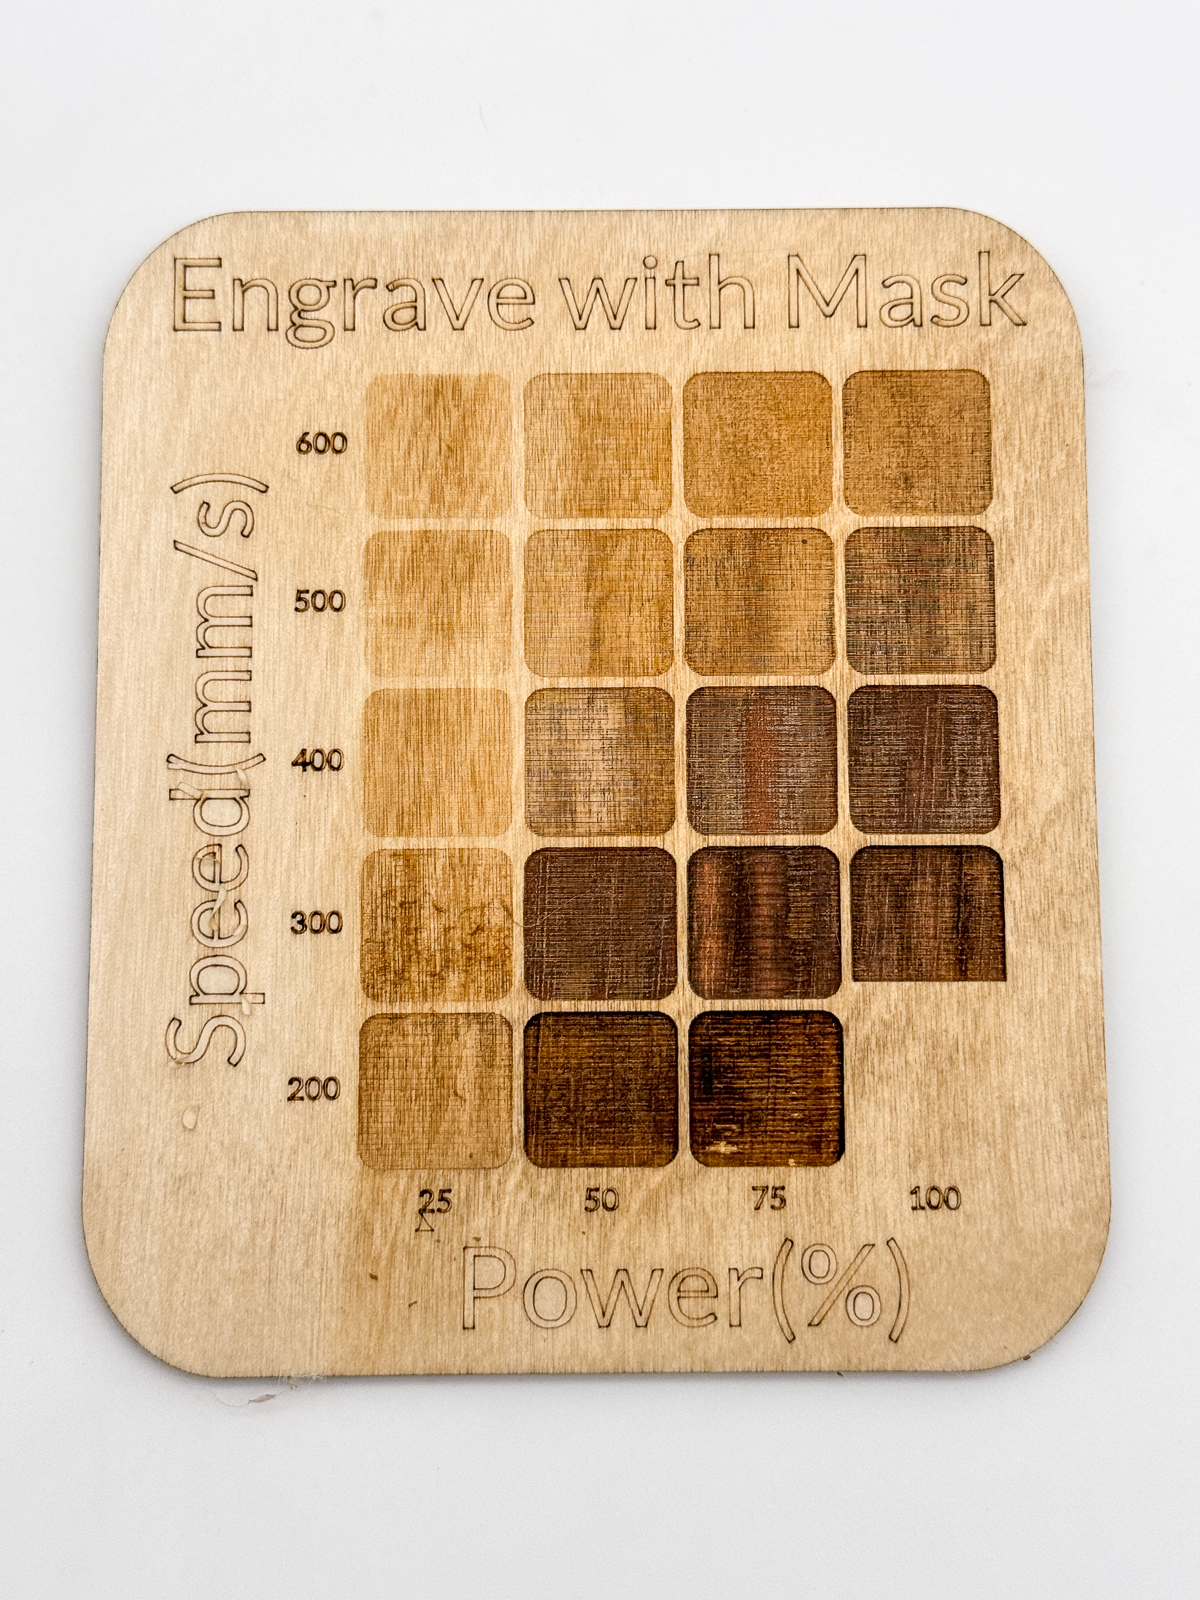 laser test grid for engrave speed and power with mask over wood